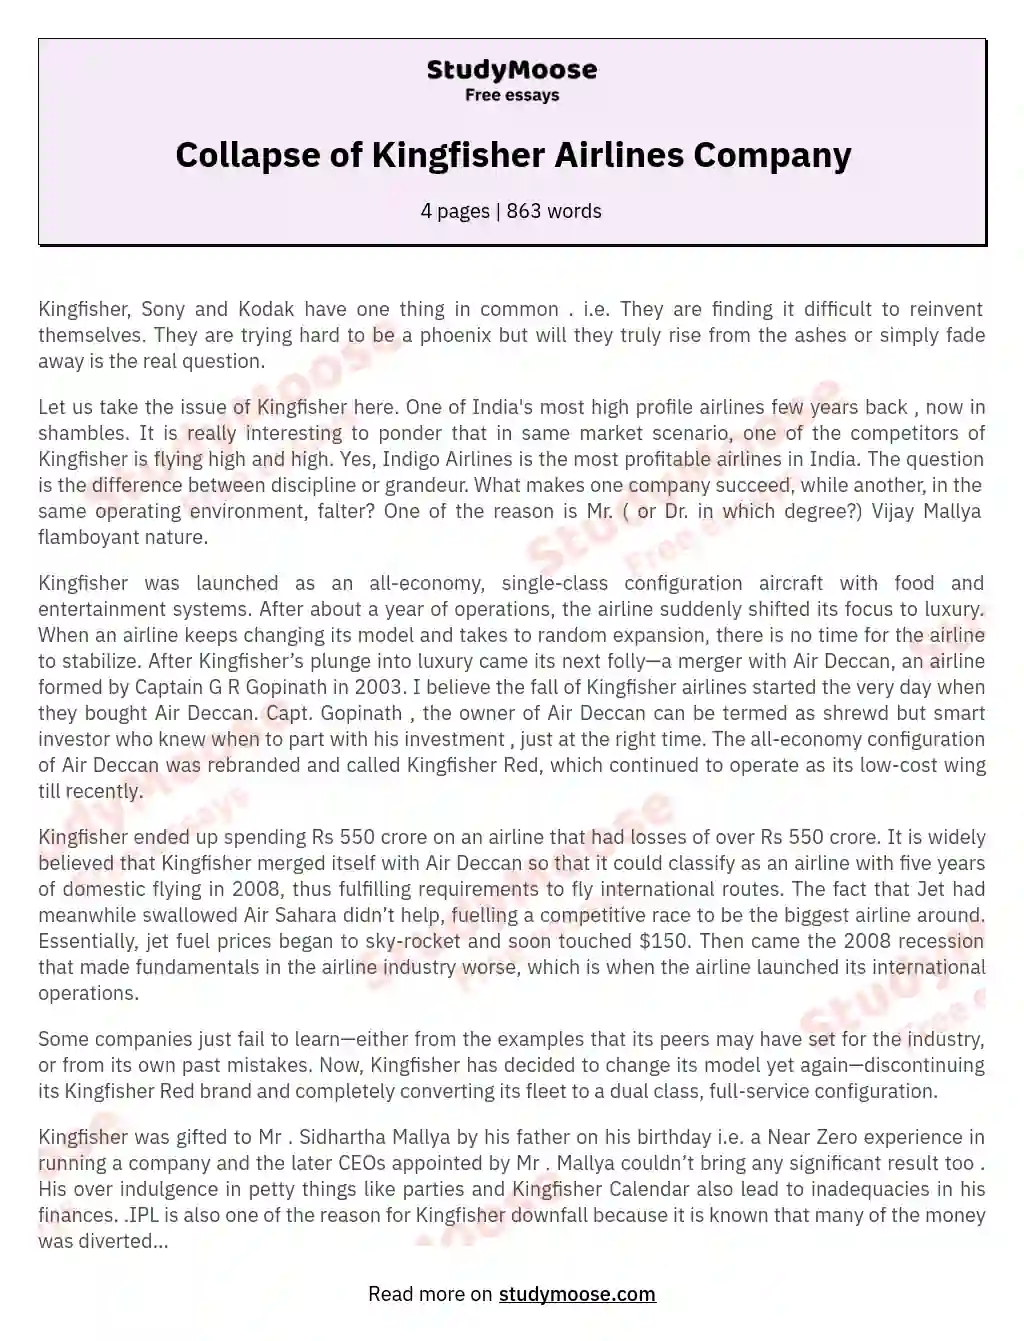 Collapse of Kingfisher Airlines Company essay